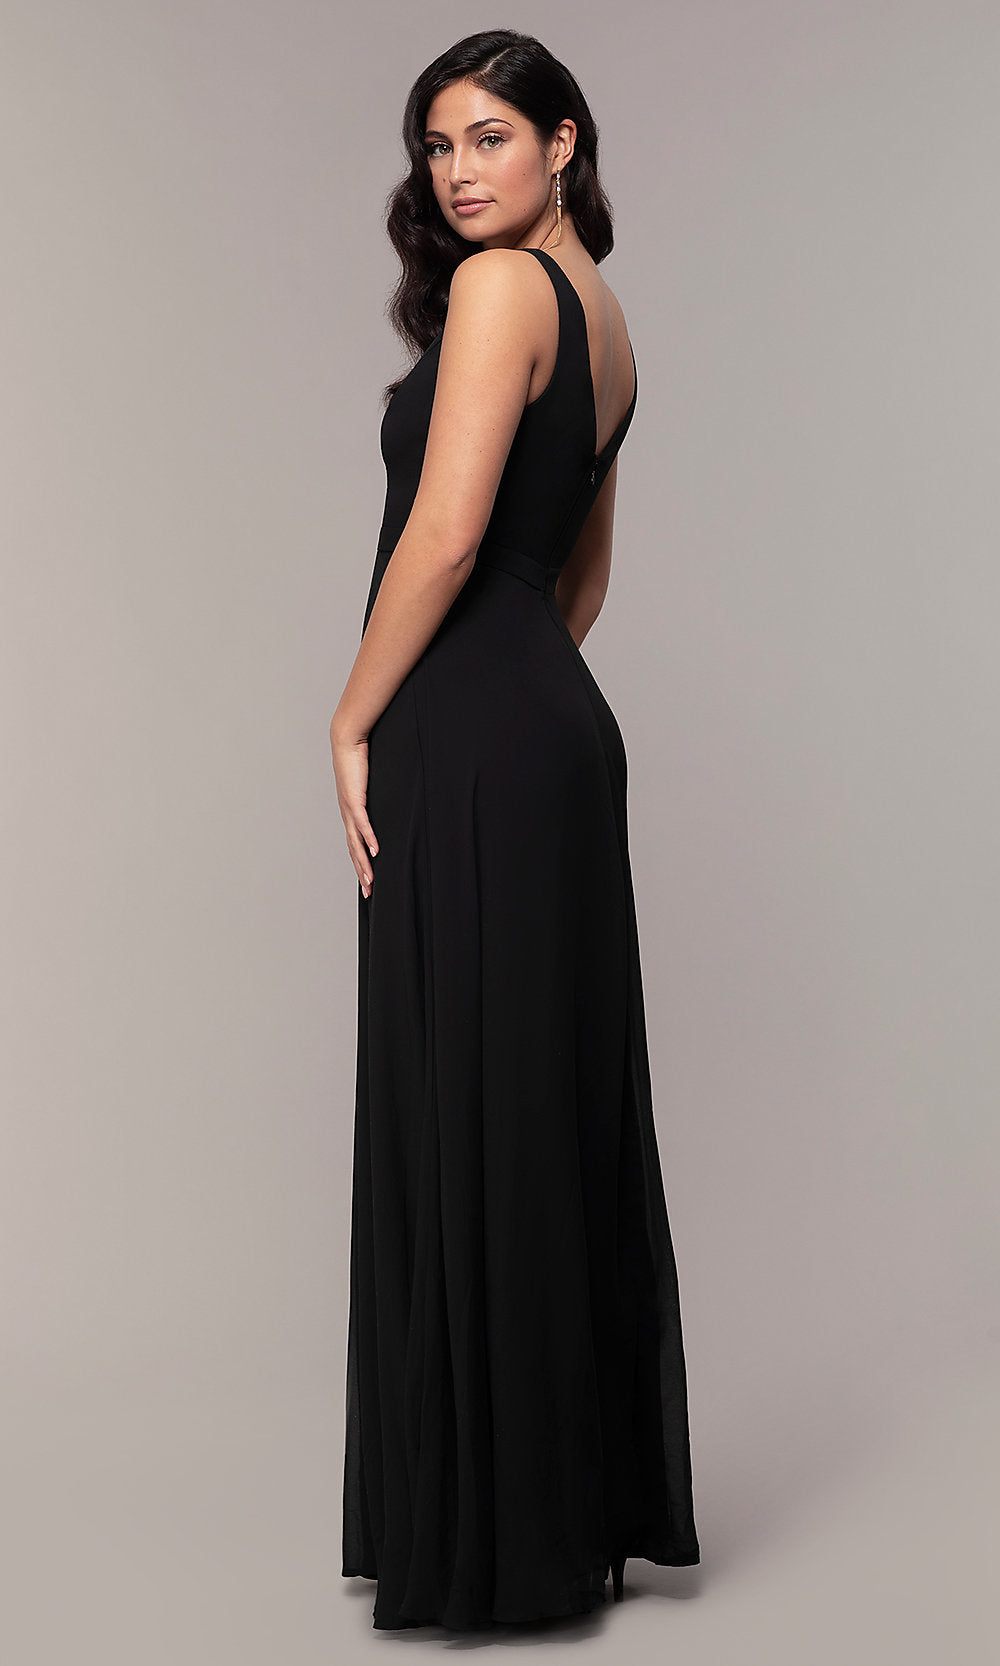  Long Black Formal V-Neck Evening Gown with Lace Trim